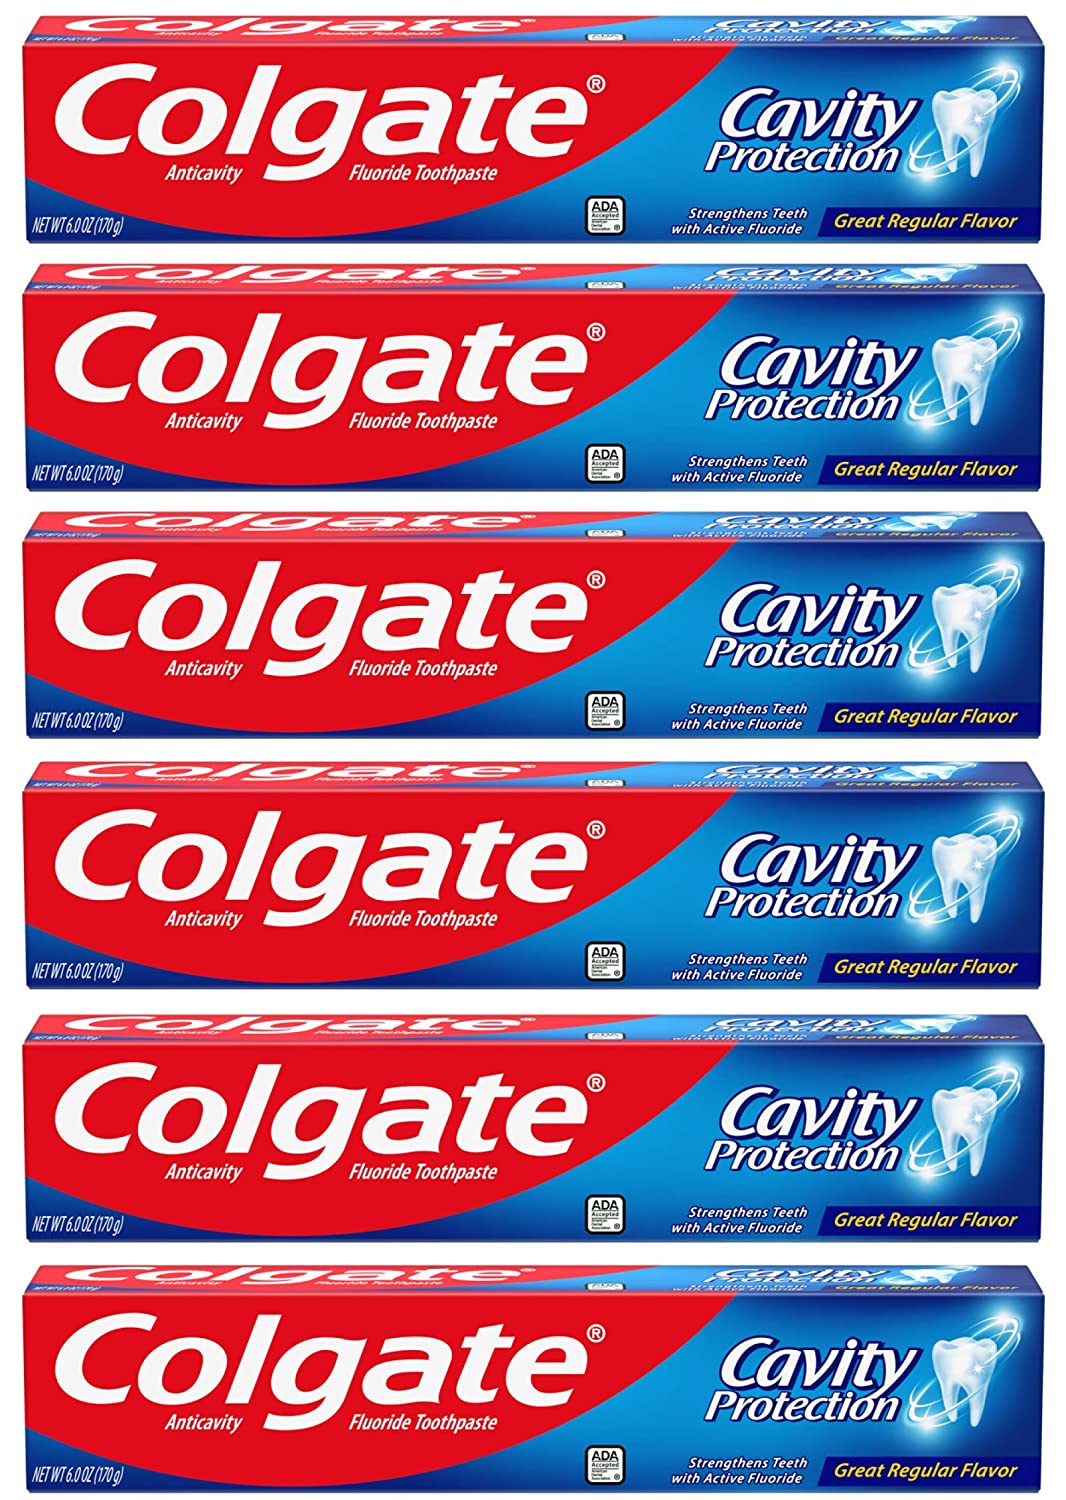 6-Pack 6-Oz Colgate Cavity Protection Toothpaste w/Fluoride $6.14 w/ S&S + Free Shipping w/ Prime or on orders over $25